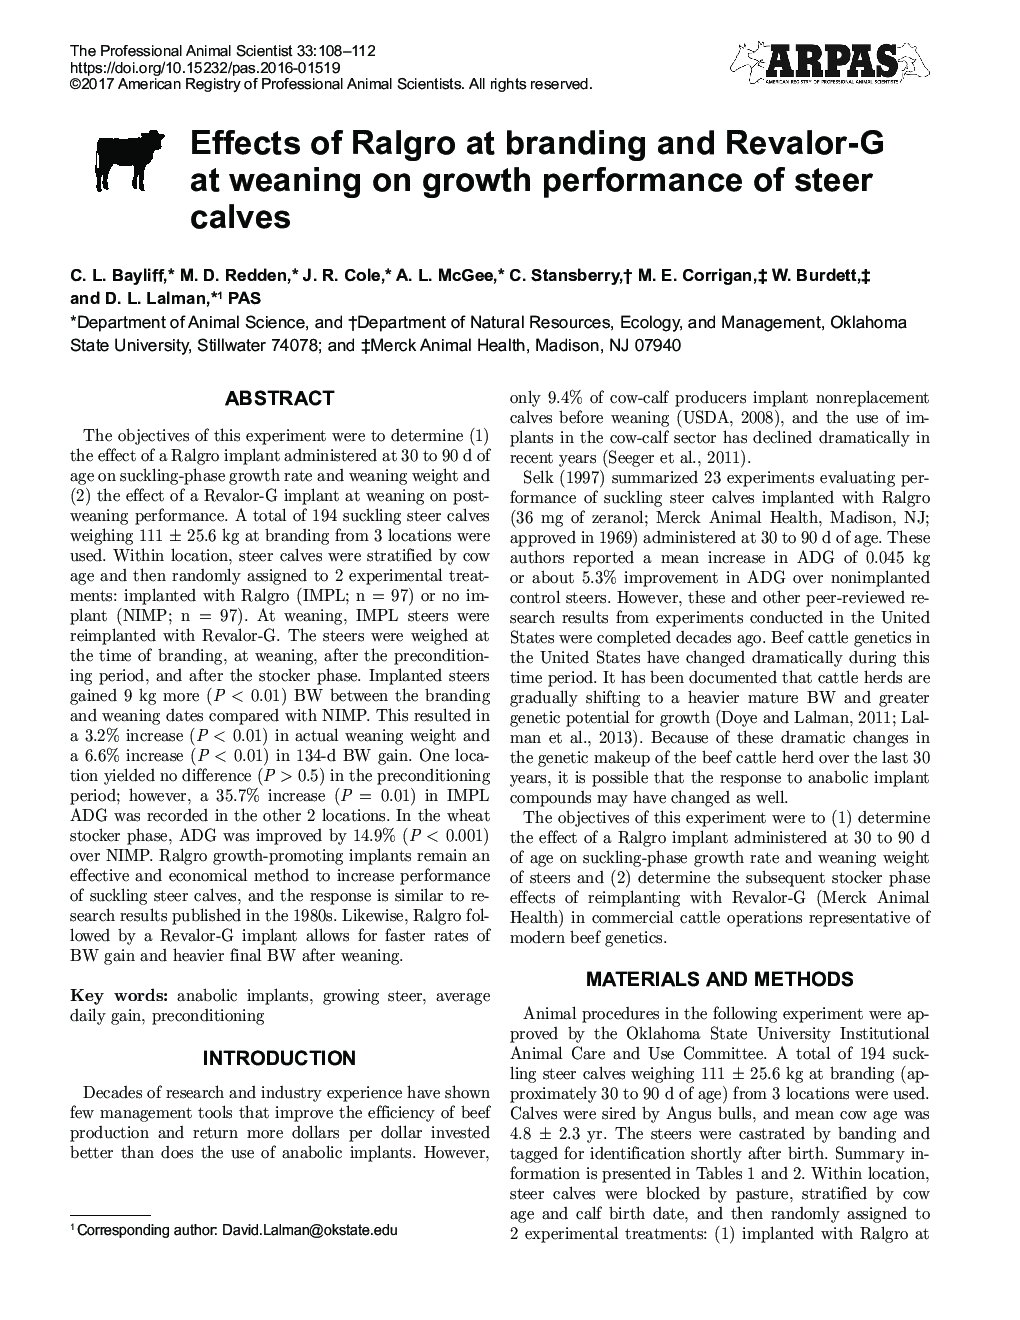 Effects of Ralgro at branding and Revalor-G at weaning on growth performance of steer calves